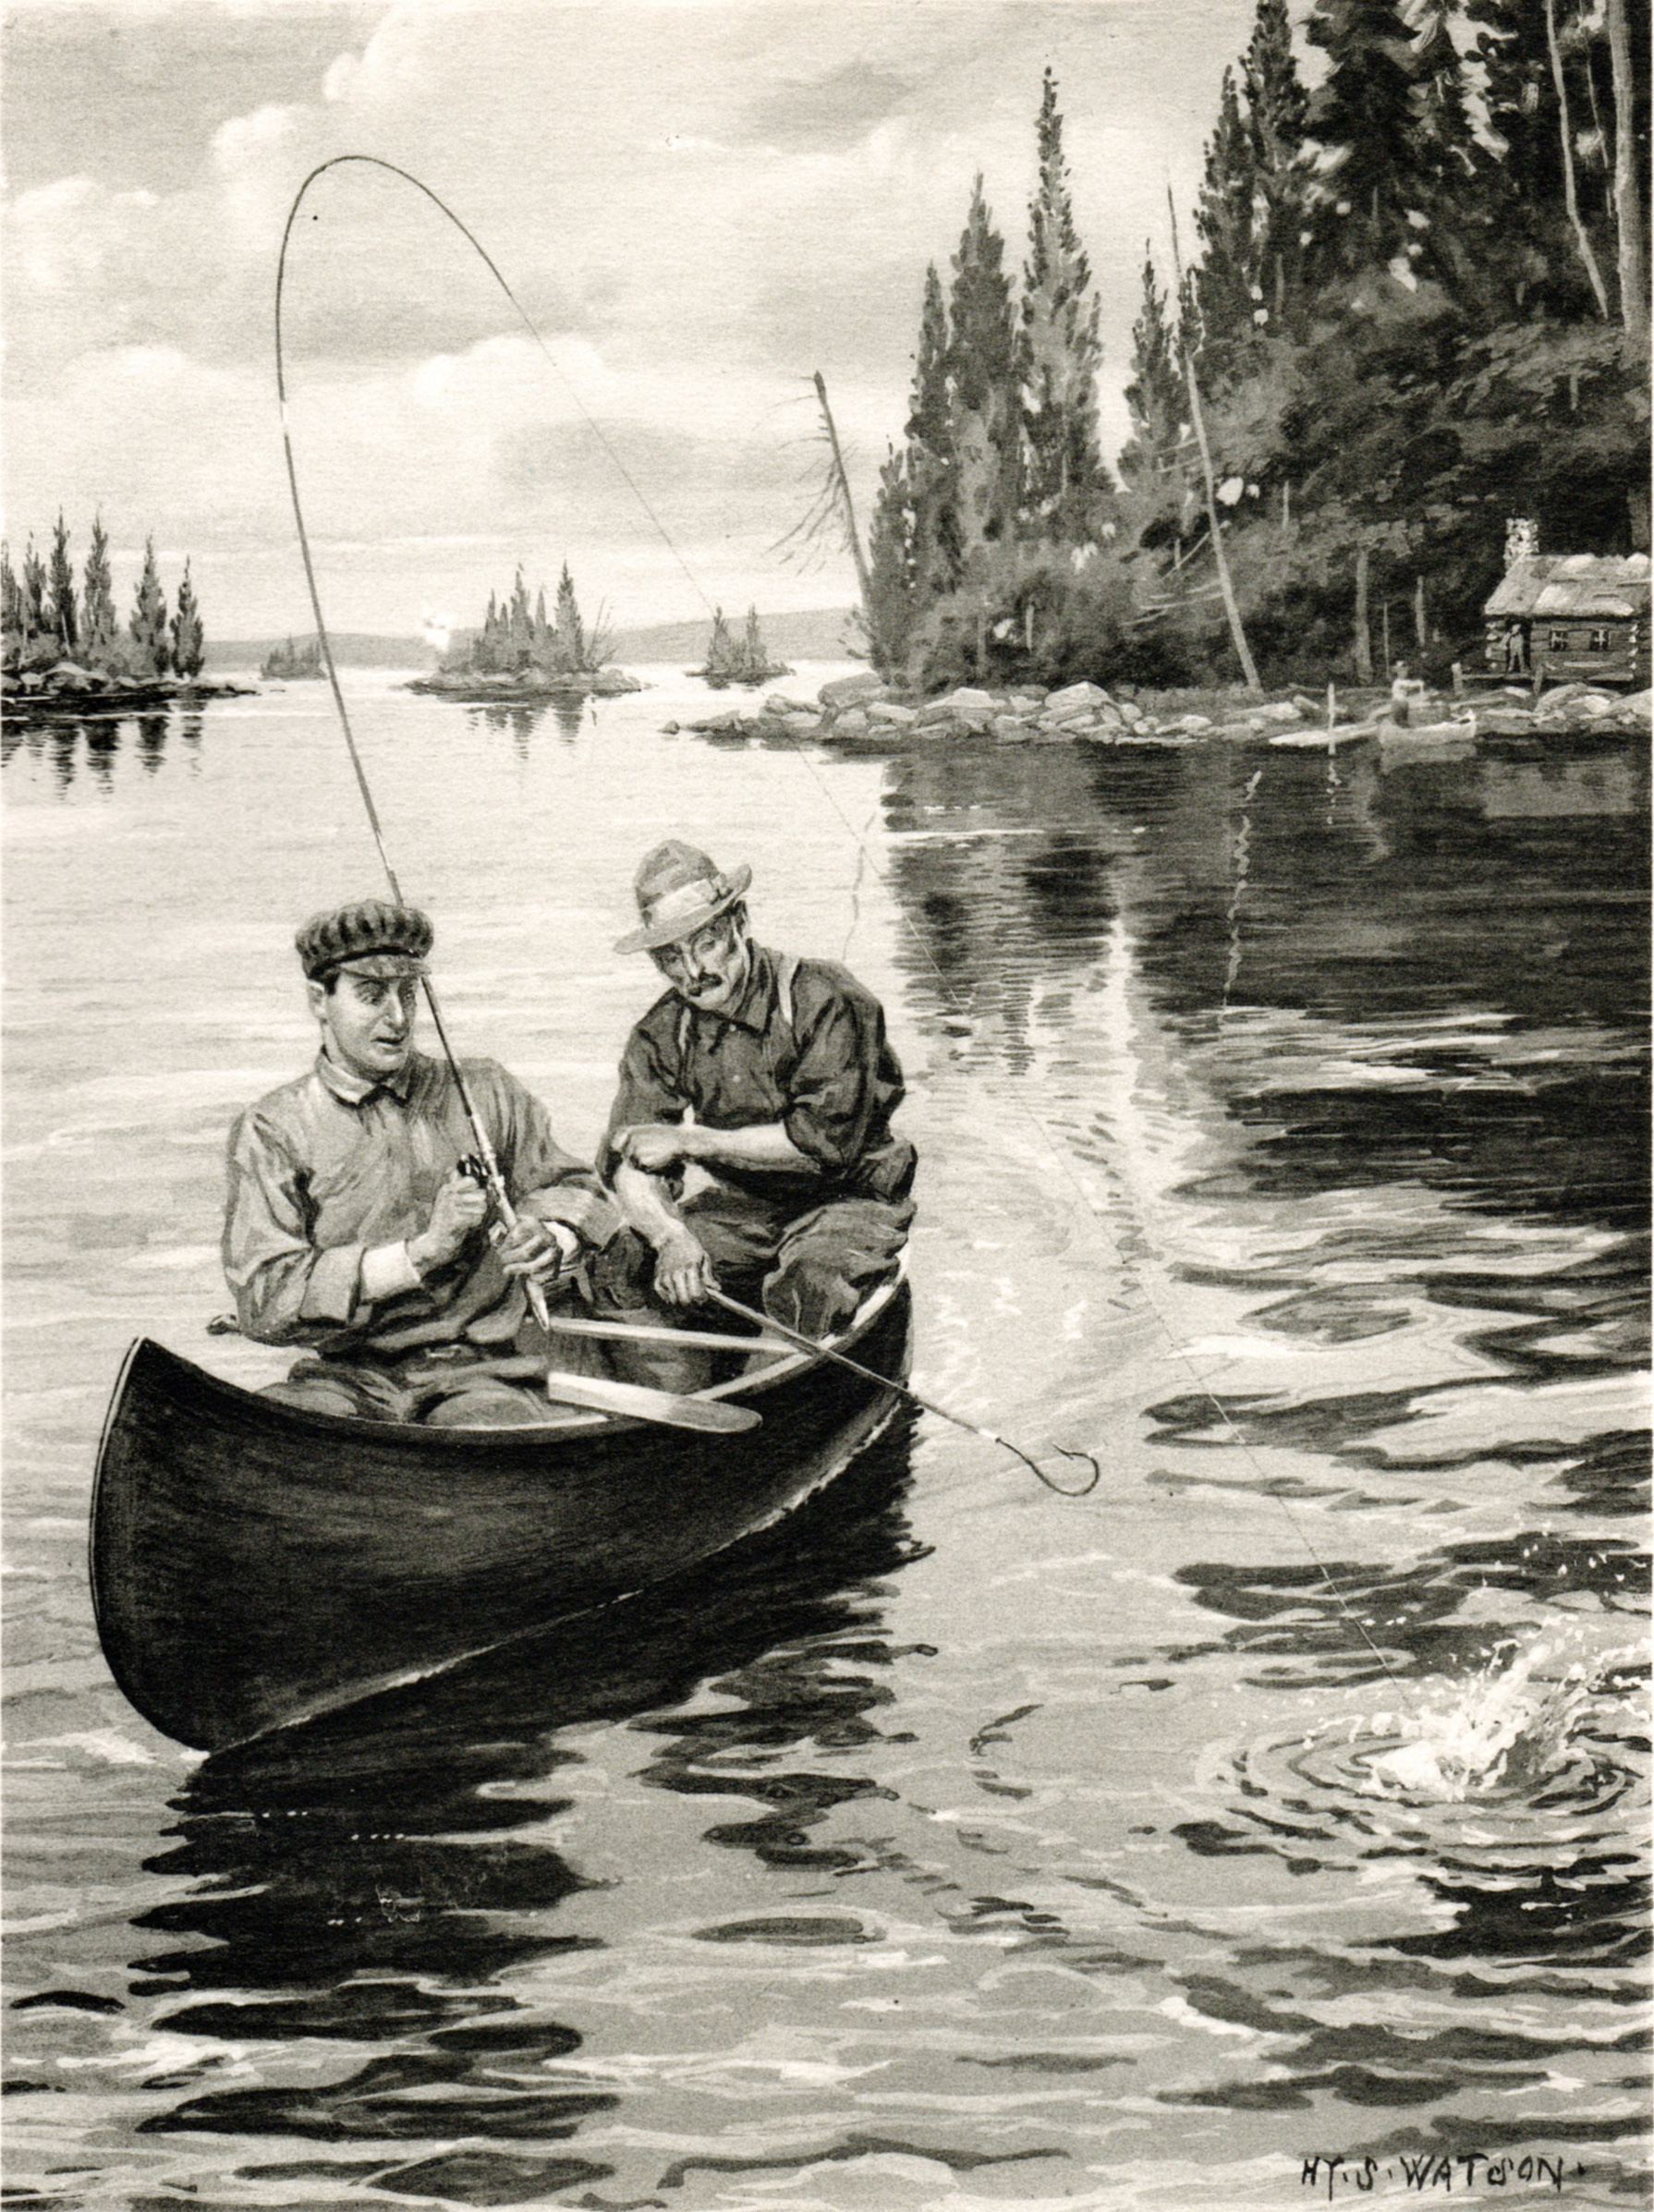 Watson, Hy S. / Fishing & Hunting scenes (1904-07)http://www.darvillsrareprints.com/Denton%20Fish%20New%20York%20Forest%20Fish%20and%20Game%20Commission%201904-1907%202.htm